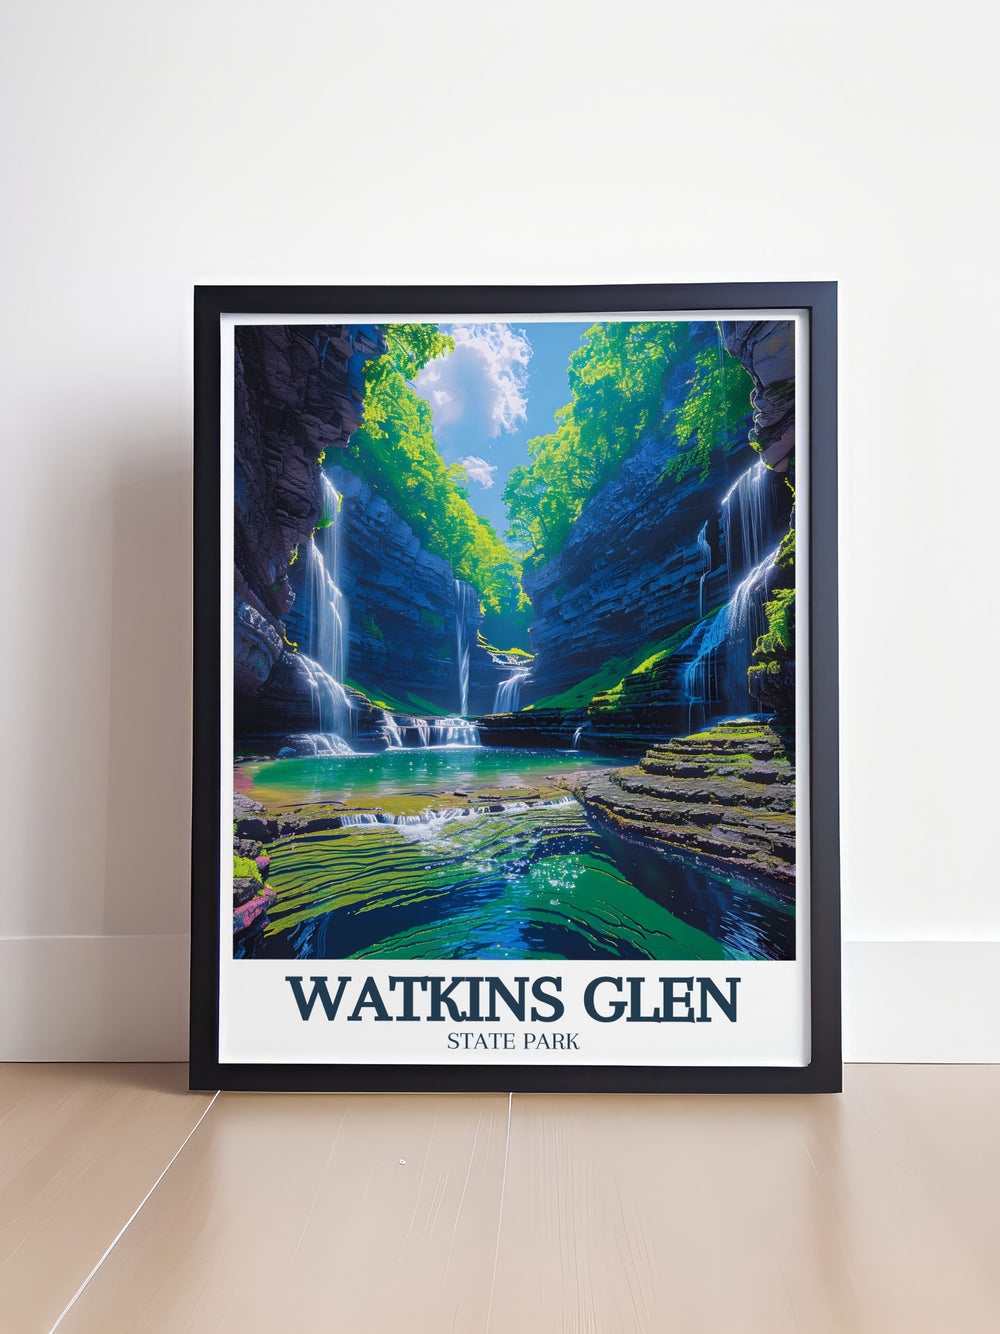 Add a touch of tranquility and history to your home with this Watkins Glen State Park wall decor. The artwork captures the essence of the parks scenic landscapes and geological features, making it a perfect piece for those who appreciate New Yorks natural and geological treasures. It blends art and history beautifully, offering a serene and elegant display.